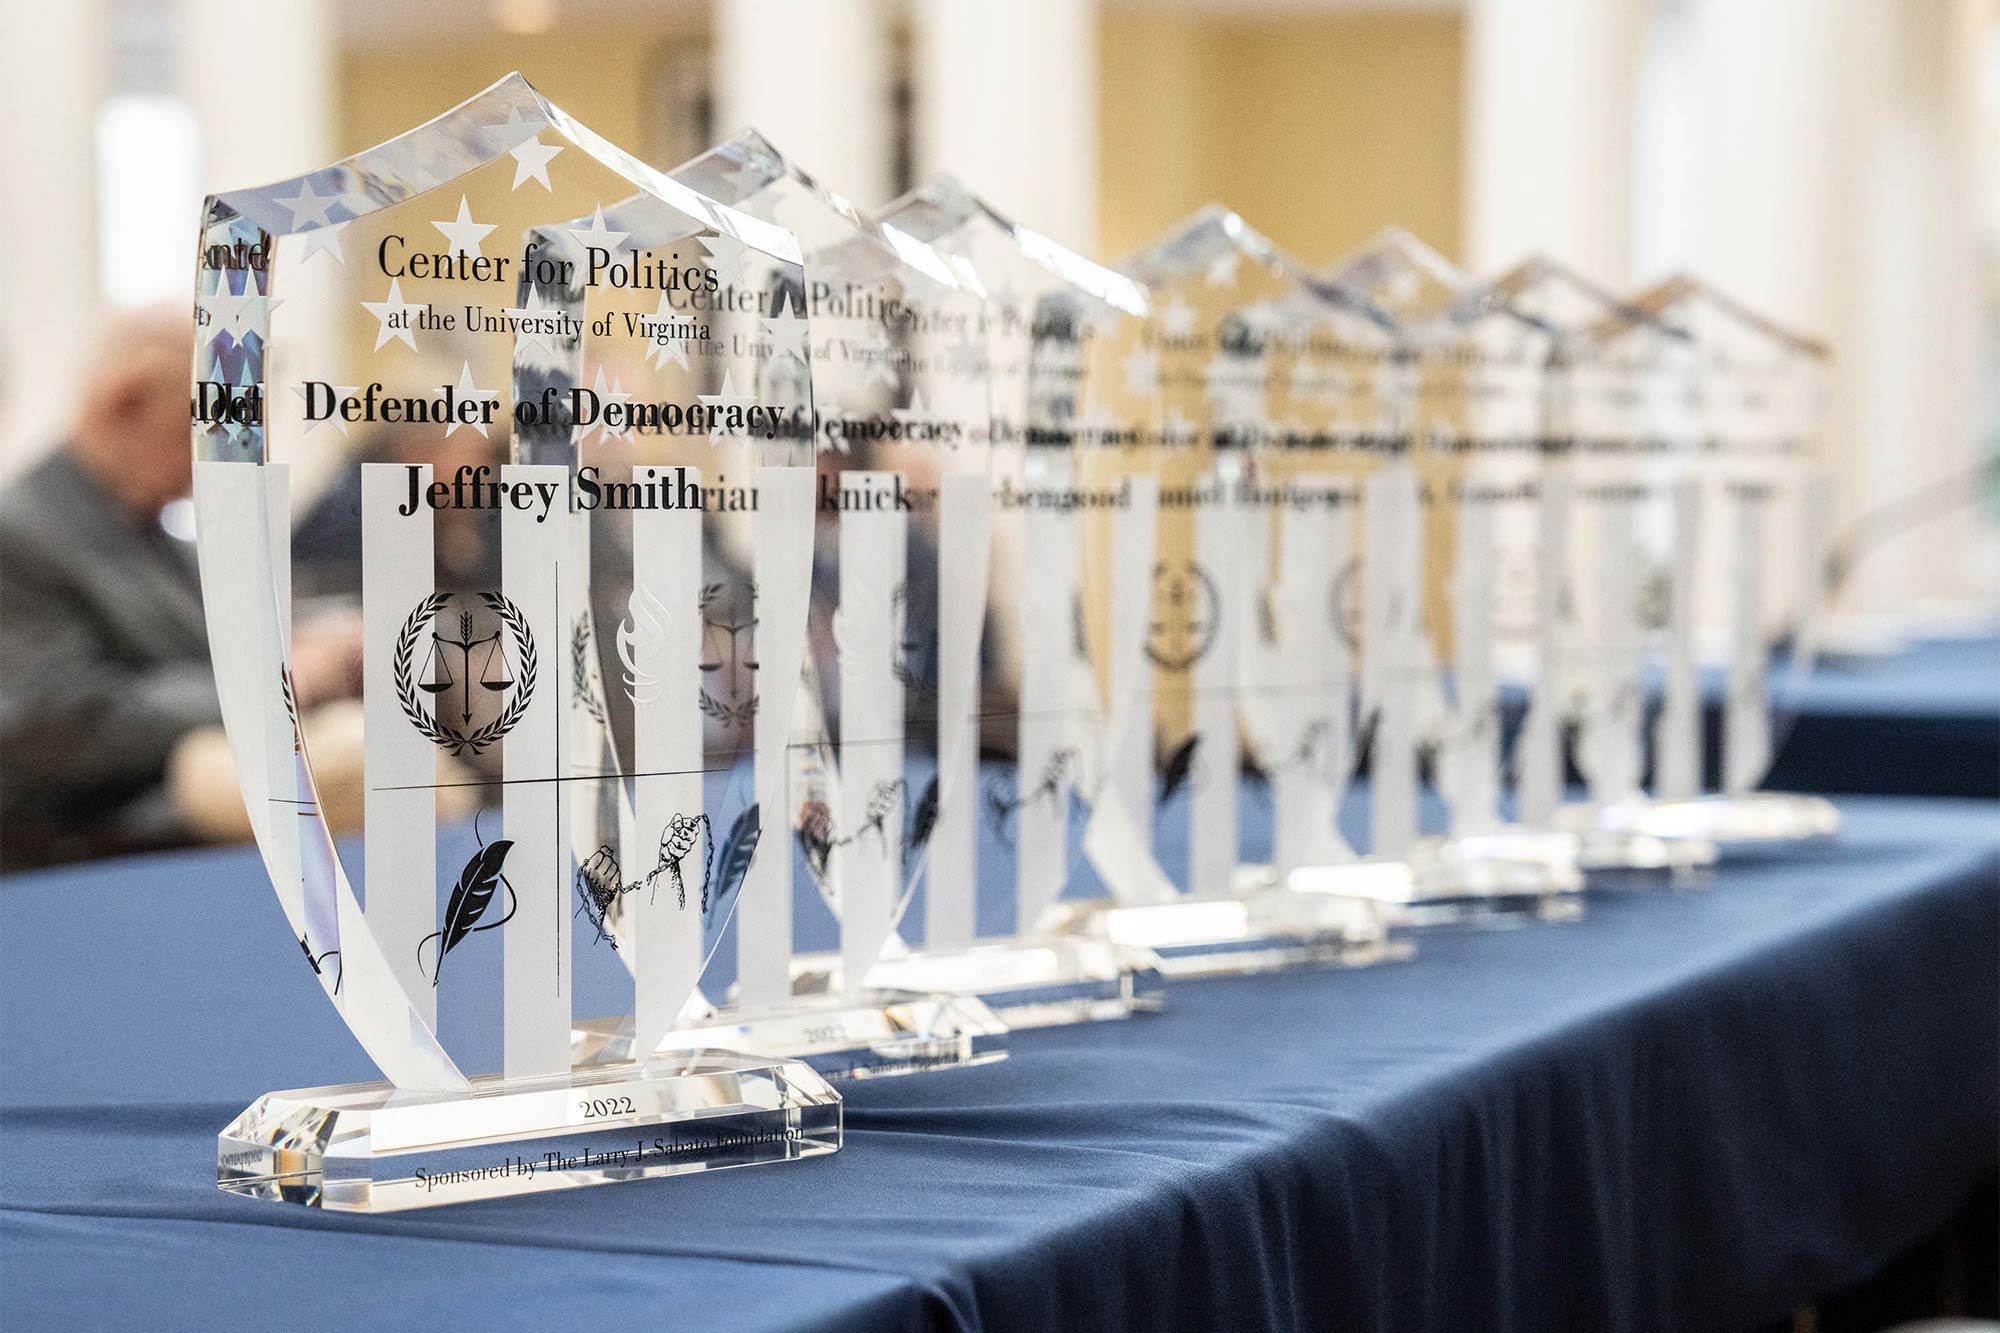 Seven glass awards lined up on a table with a blue tablecloth